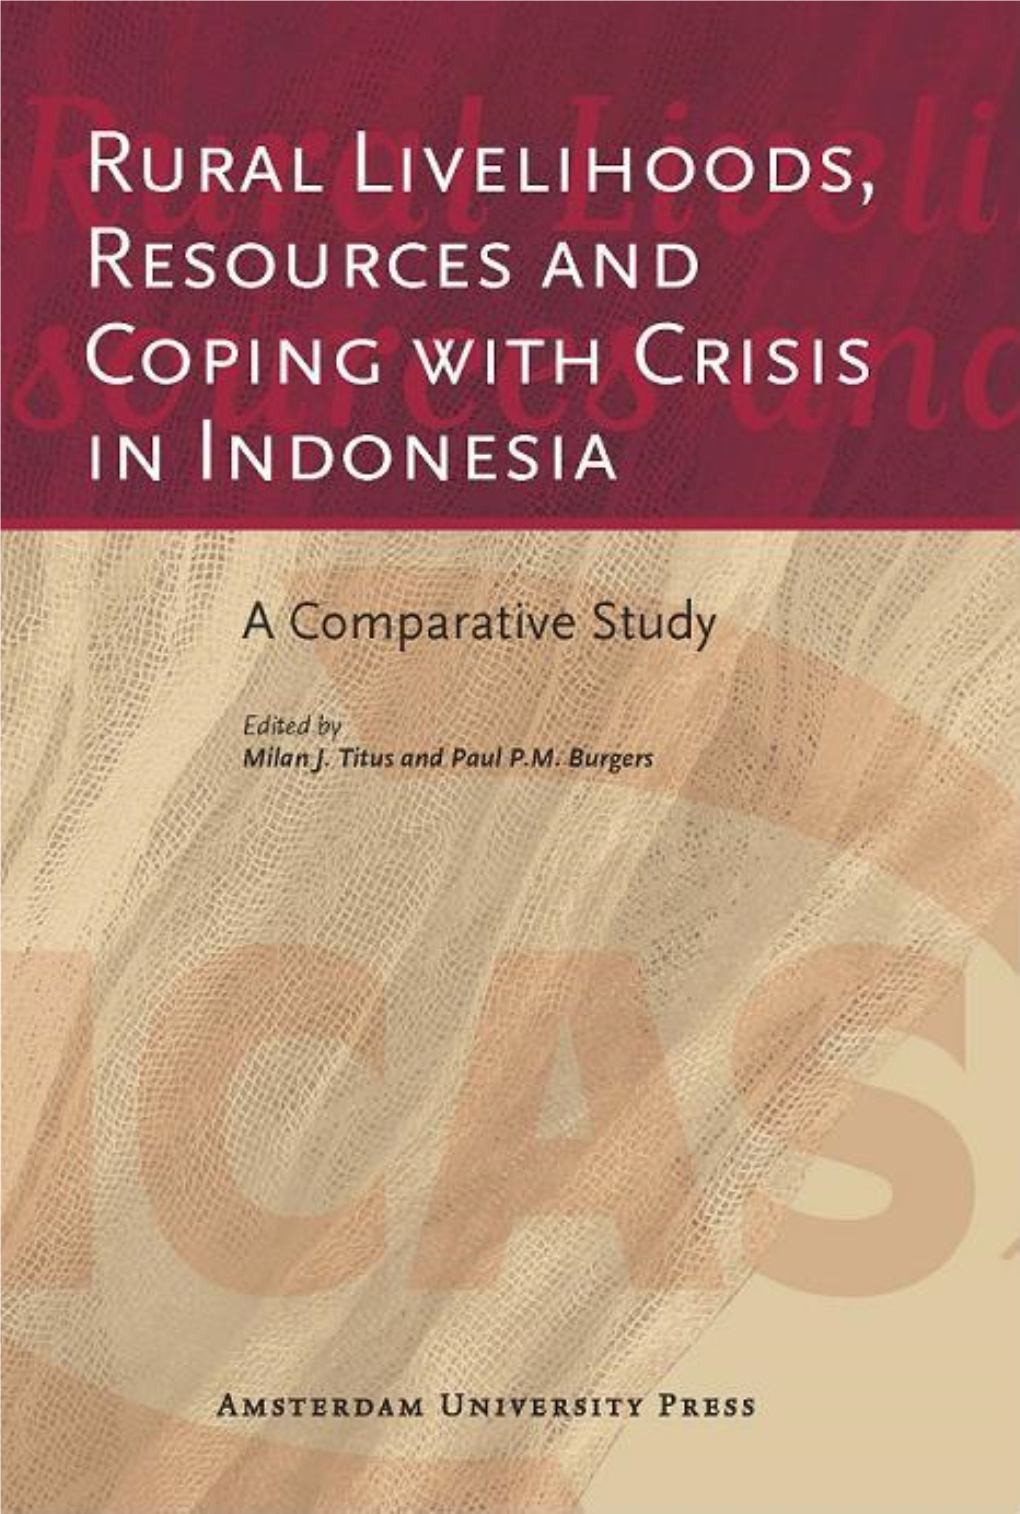 Rural Livelihoods, Resources and Coping with Crisis in Indonesia Publications Series